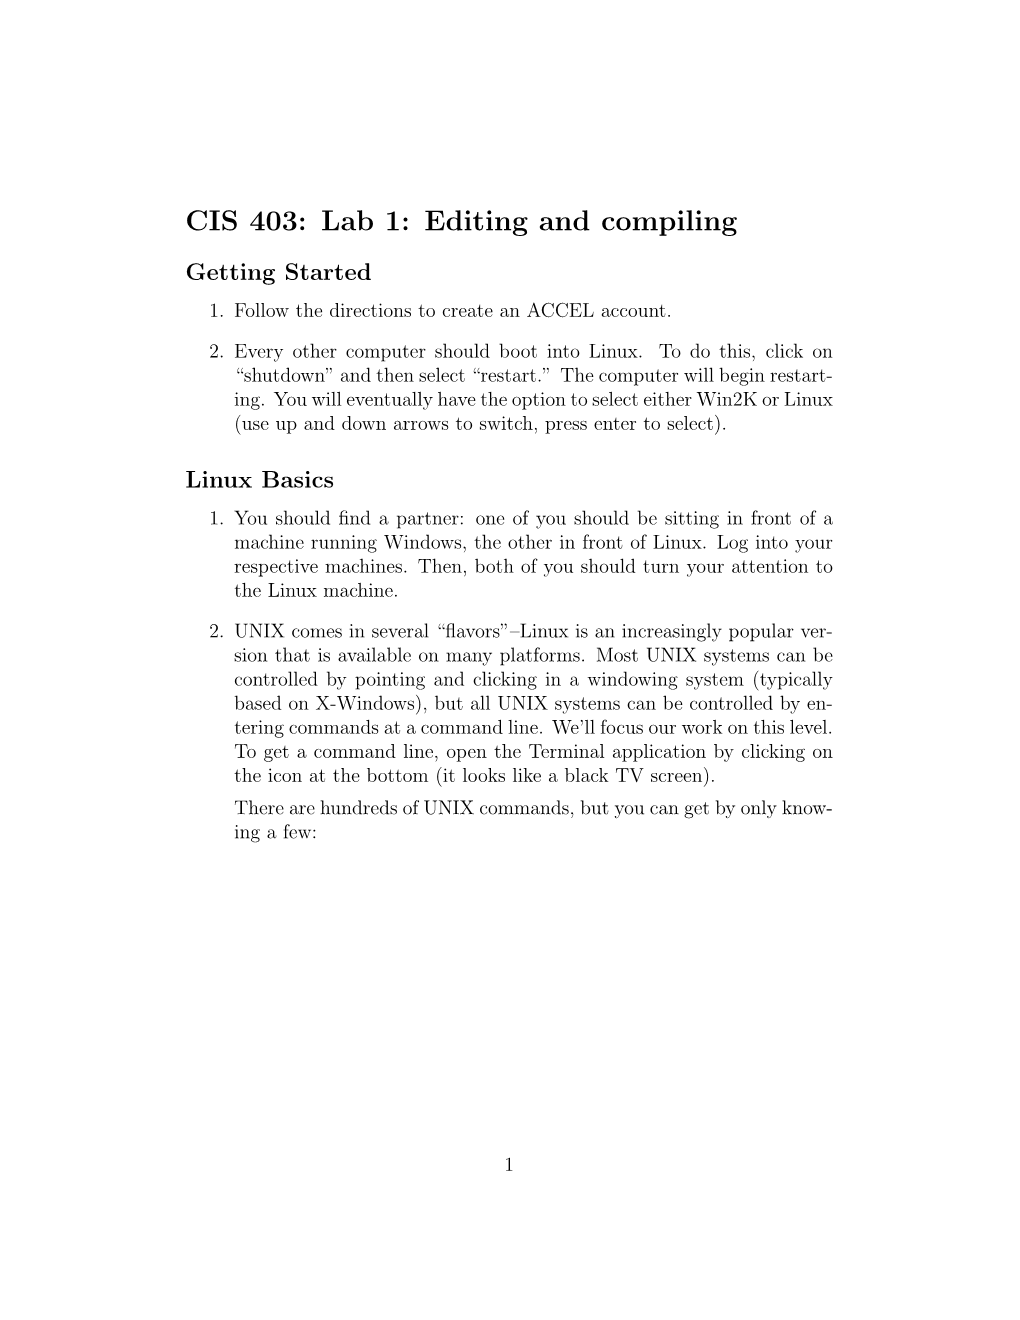 CIS 403: Lab 1: Editing and Compiling